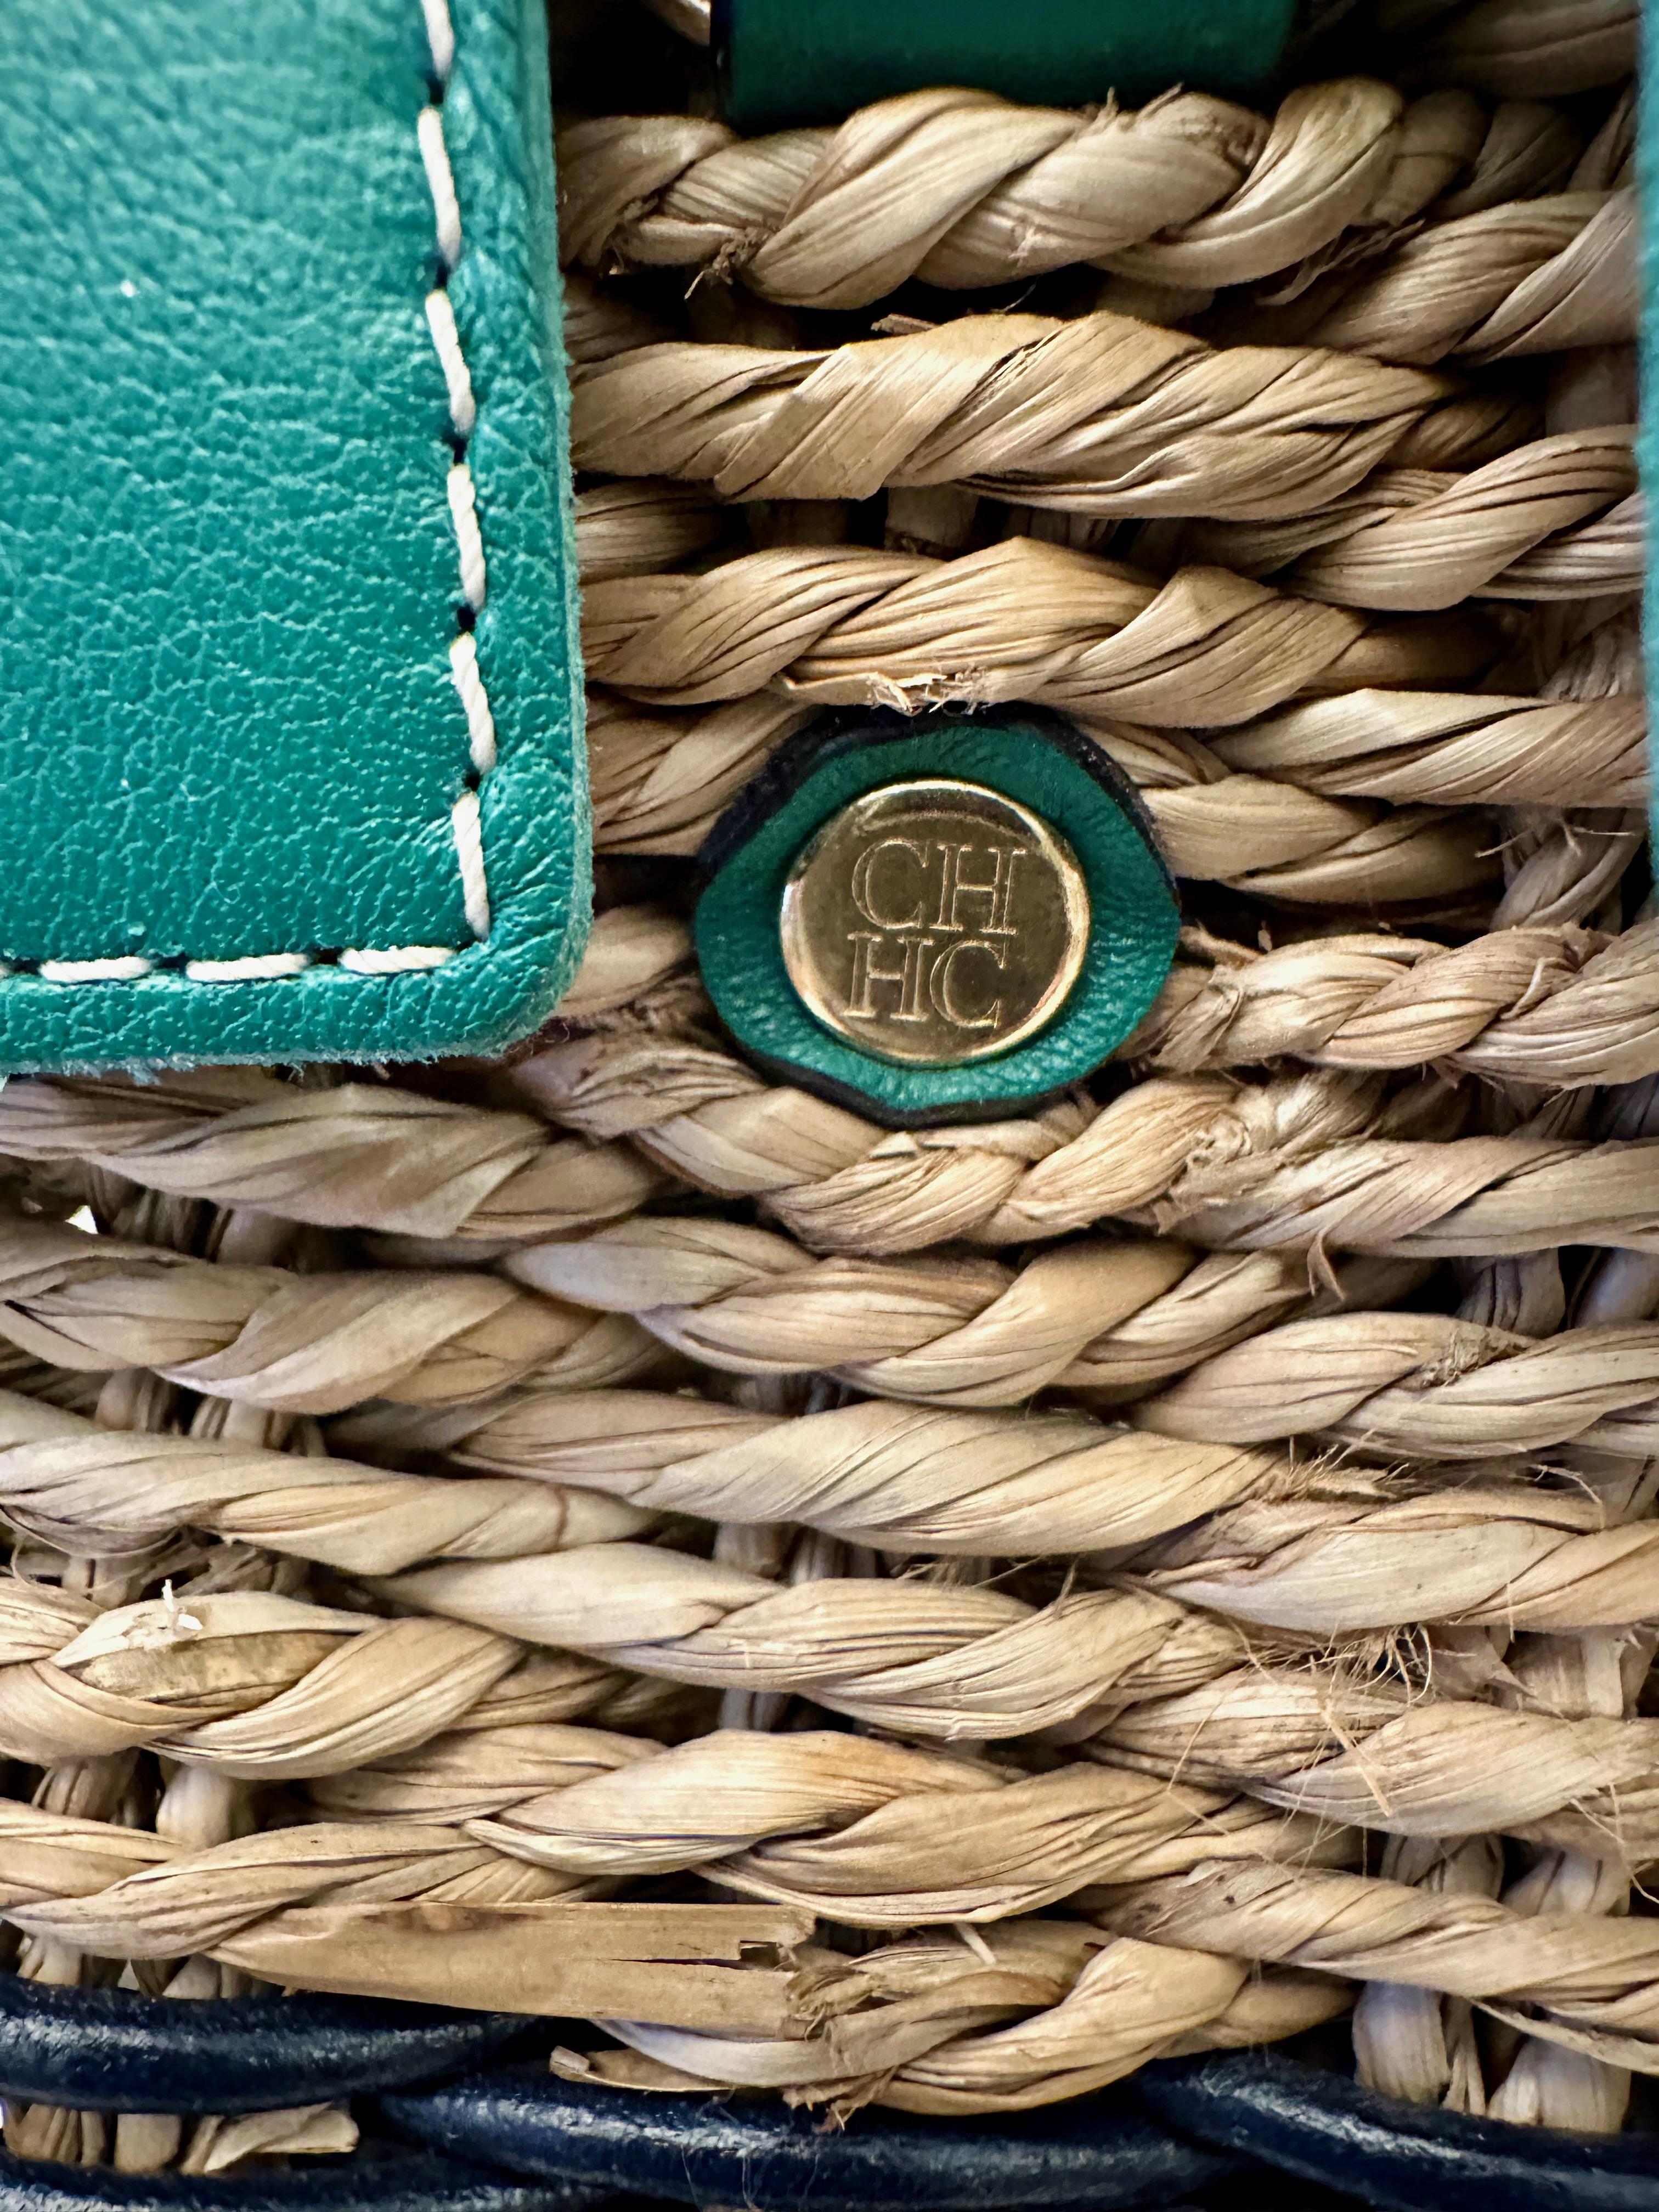 This pre-owned Vendome bag is handcrafted from seagrass by a team of expert artisans using traditional weaving techniques. 
It features leather handles with handcrafted contrasting stitching and edging.

Year: 2022
Material: Seagrass and Calf